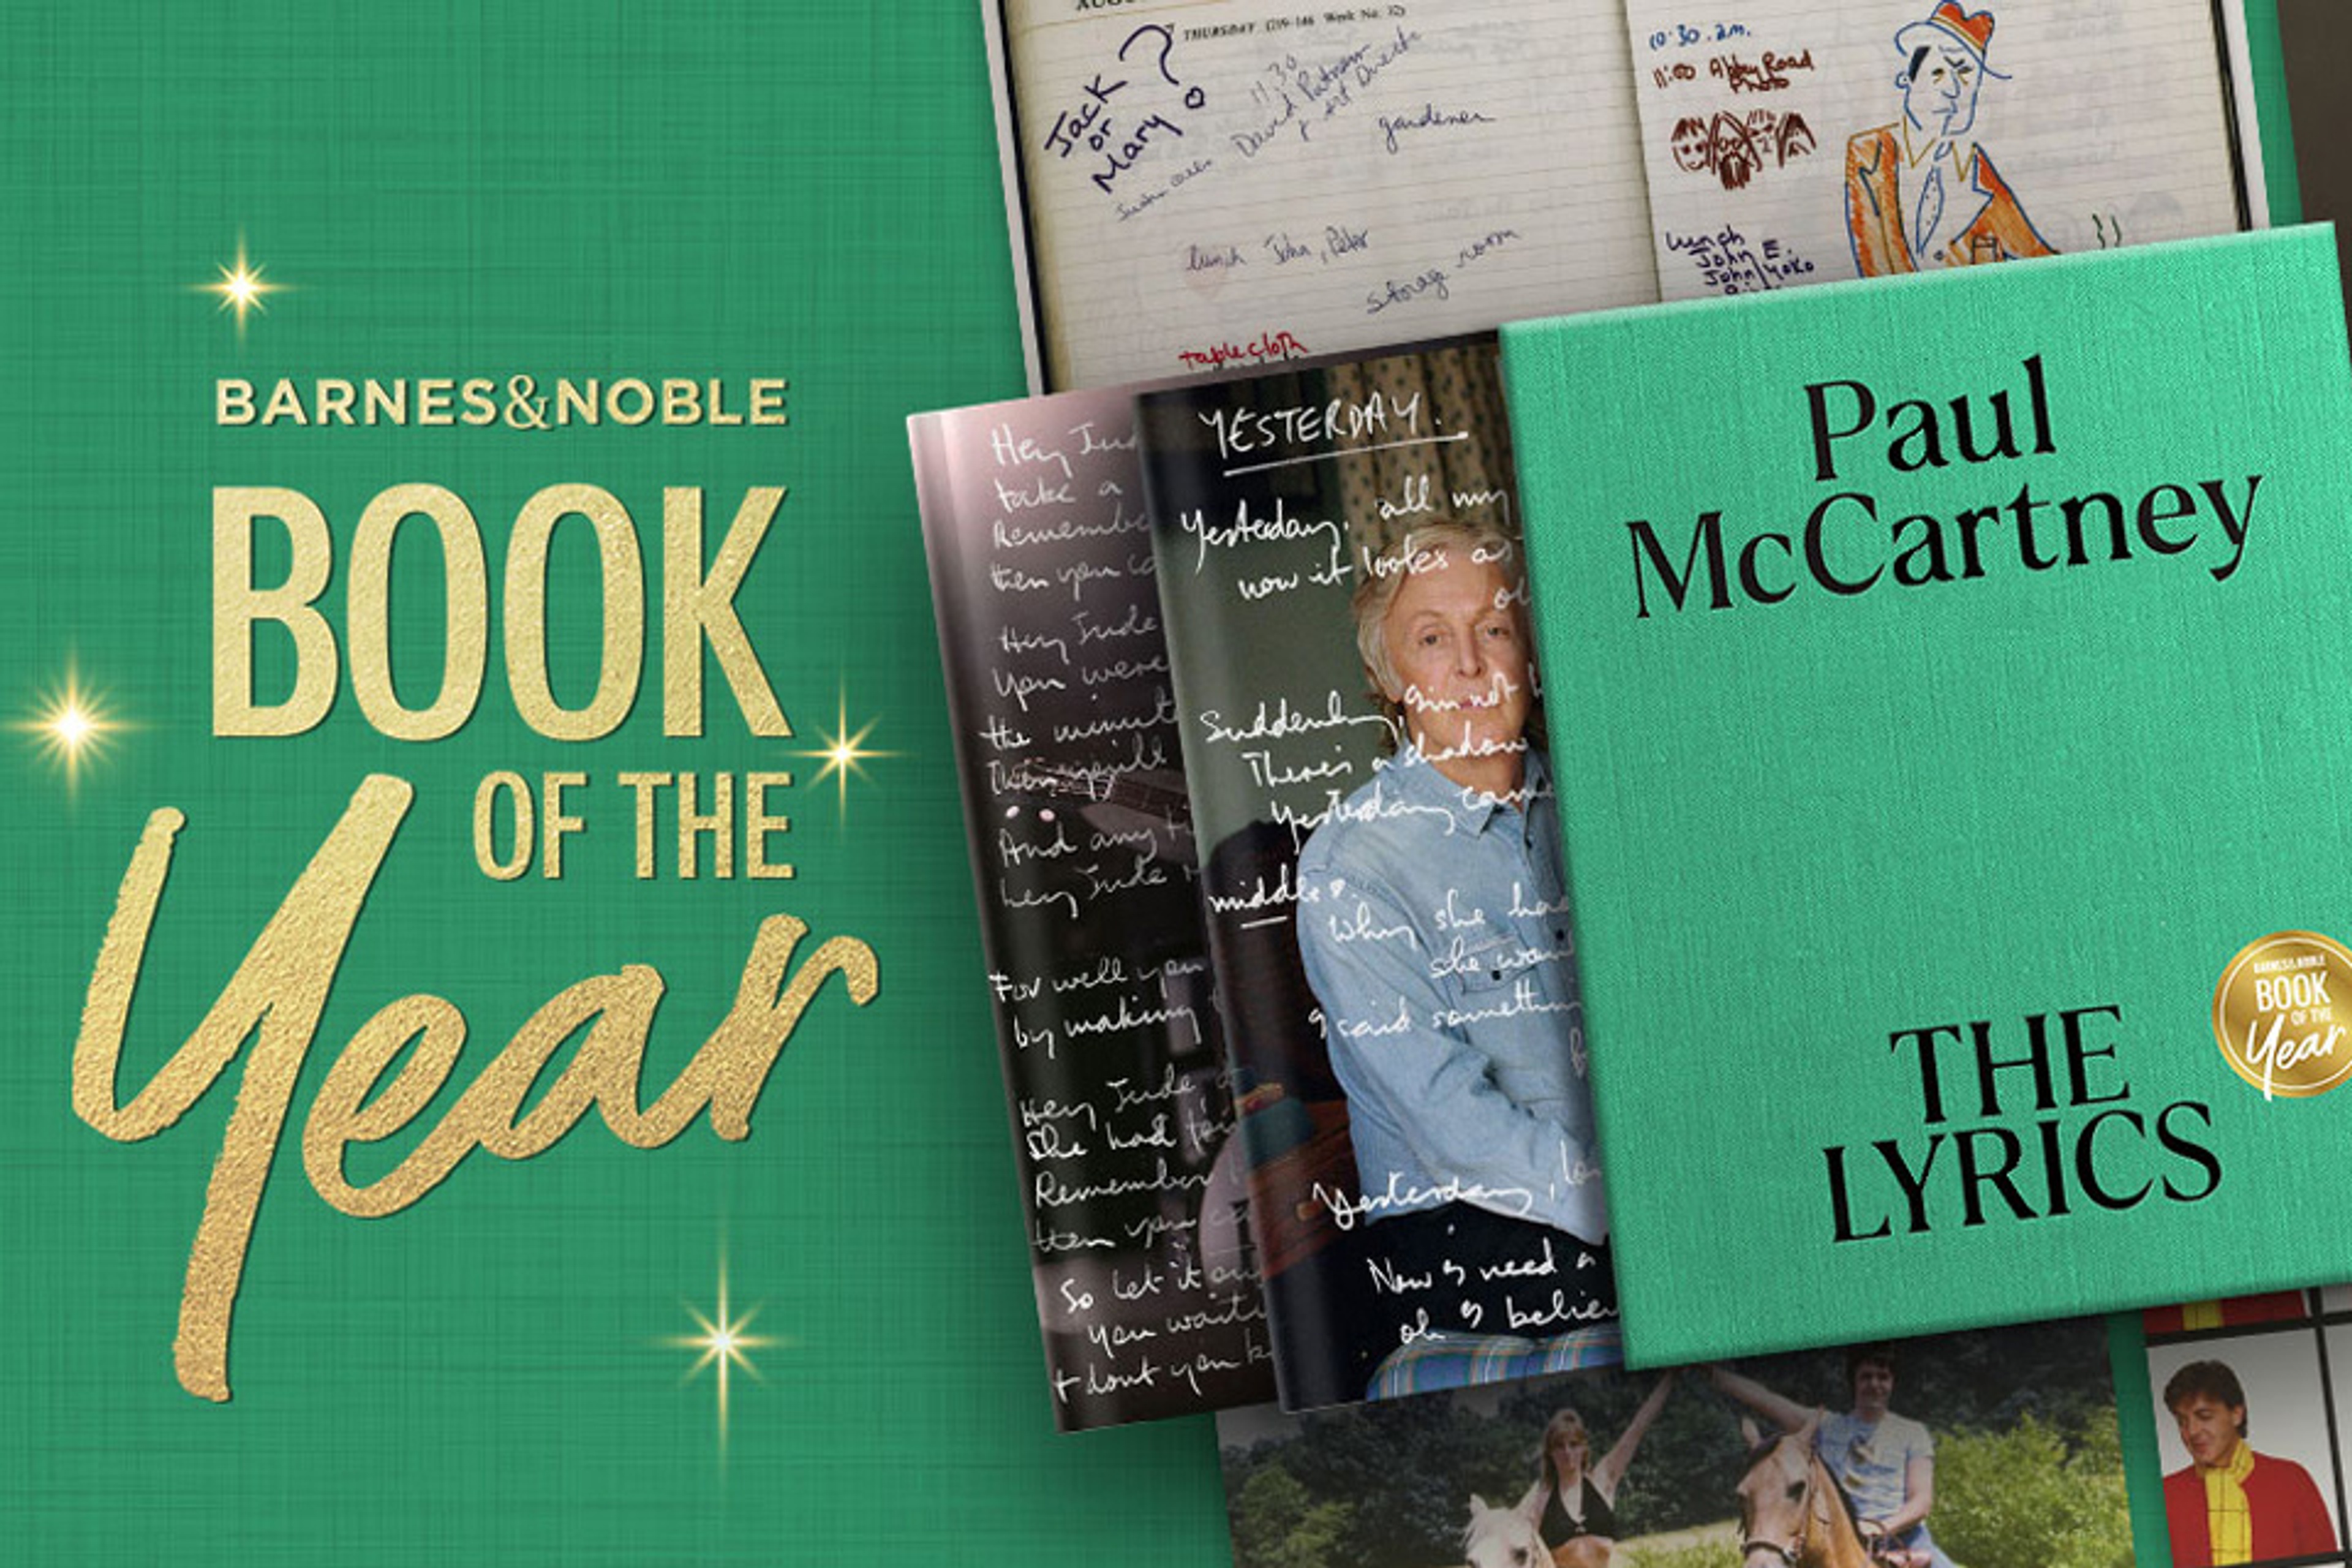 'The Lyrics' is the 2021 Barnes & Noble Book of the Year!